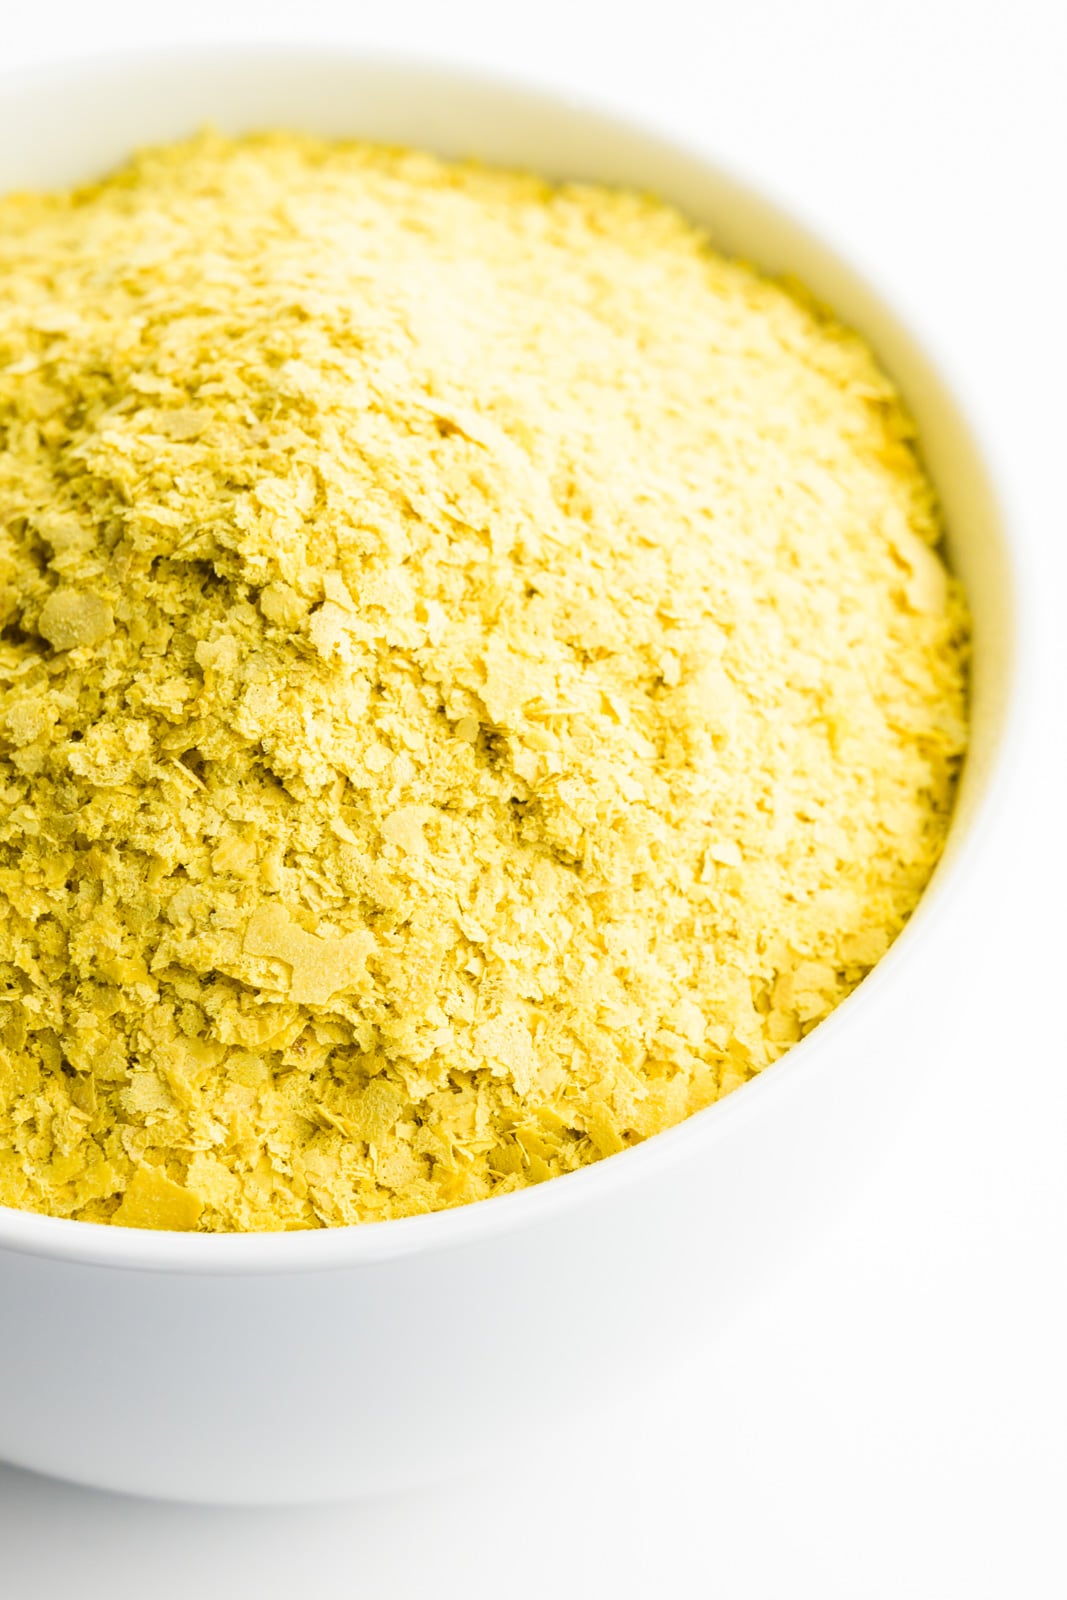 A bowl is full of yellow nutritional yeast flakes.